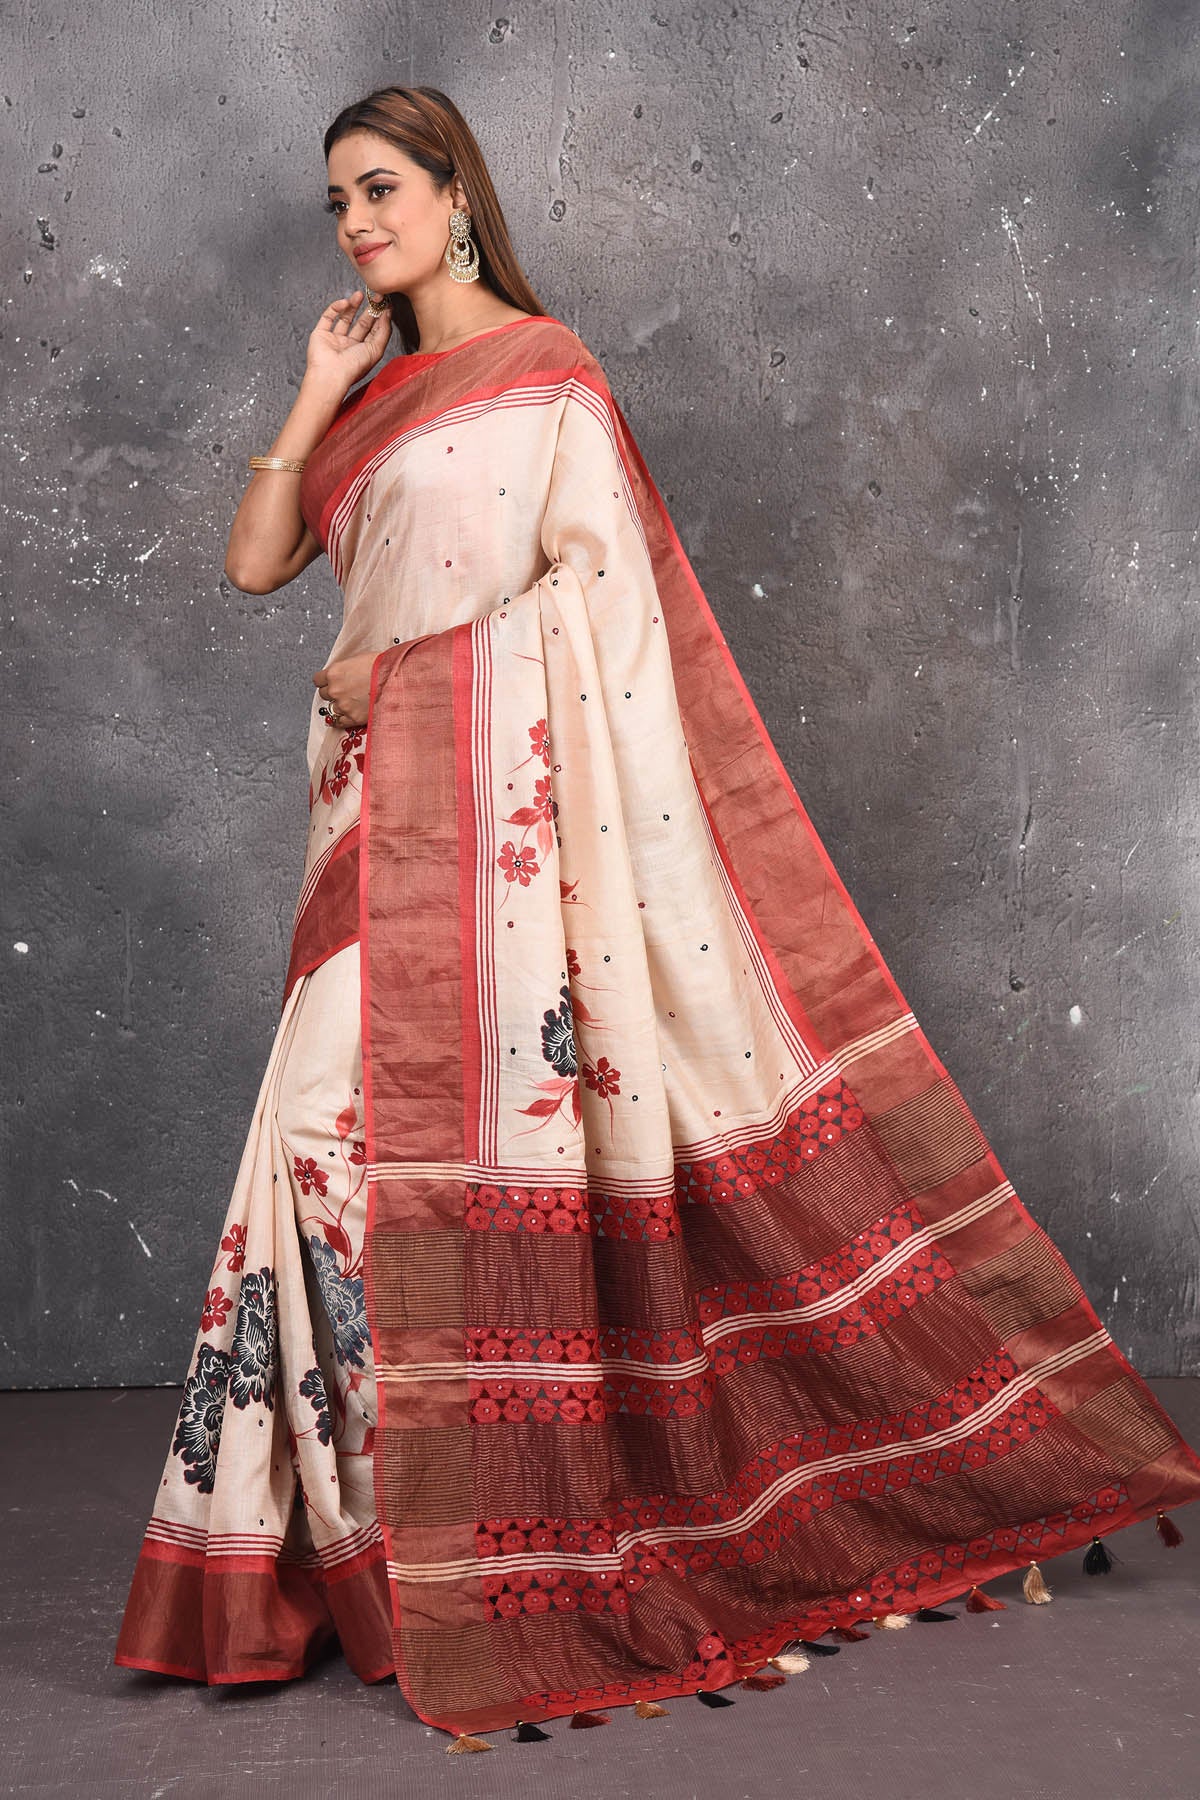 Buy this elegant offwhite-red pure tussar saree with floral embroidered hand cutwork border online in USA which is handcrafted from fine silk tussar fabric, this tie and dye saree brings out the nature of flow. You can pair this beautiful floral embroidered print saree with minimal jewellery for a casual day outfit. Add this pure tussar saree to your collection from Pure Elegance Indian fashion store in USA.-Side view with open pallu.